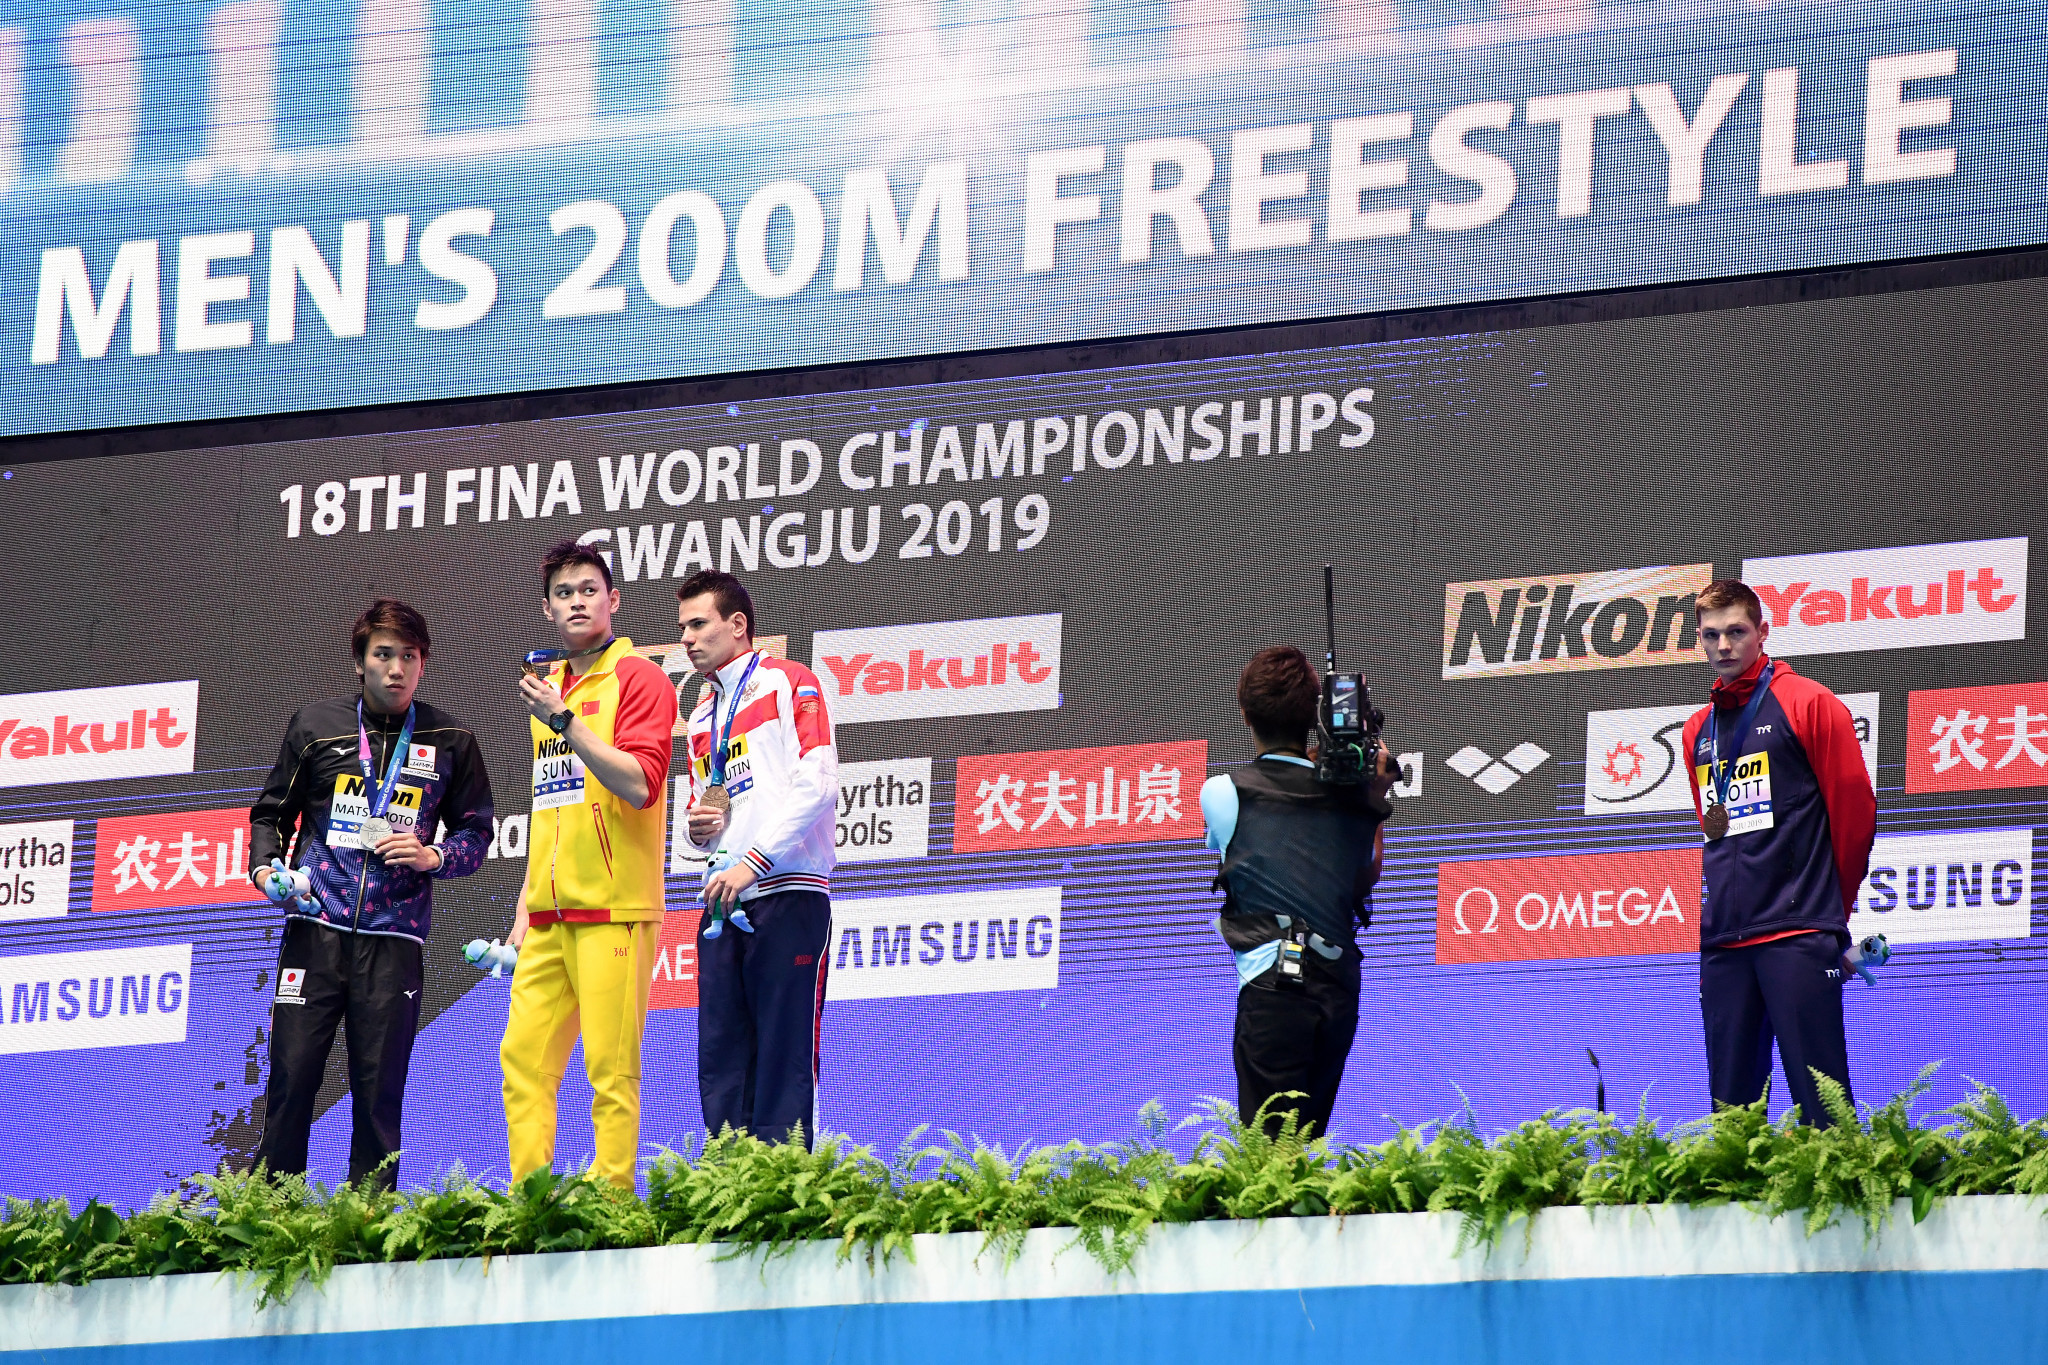 Sun Yang's rivals, including Britain's Duncan Scott, right, protested at medal ceremonies during the FINA World Aquatics Championships in Gwangju about the fact he had escaped a ban for allegedly destroying a blood sample ©Getty Images